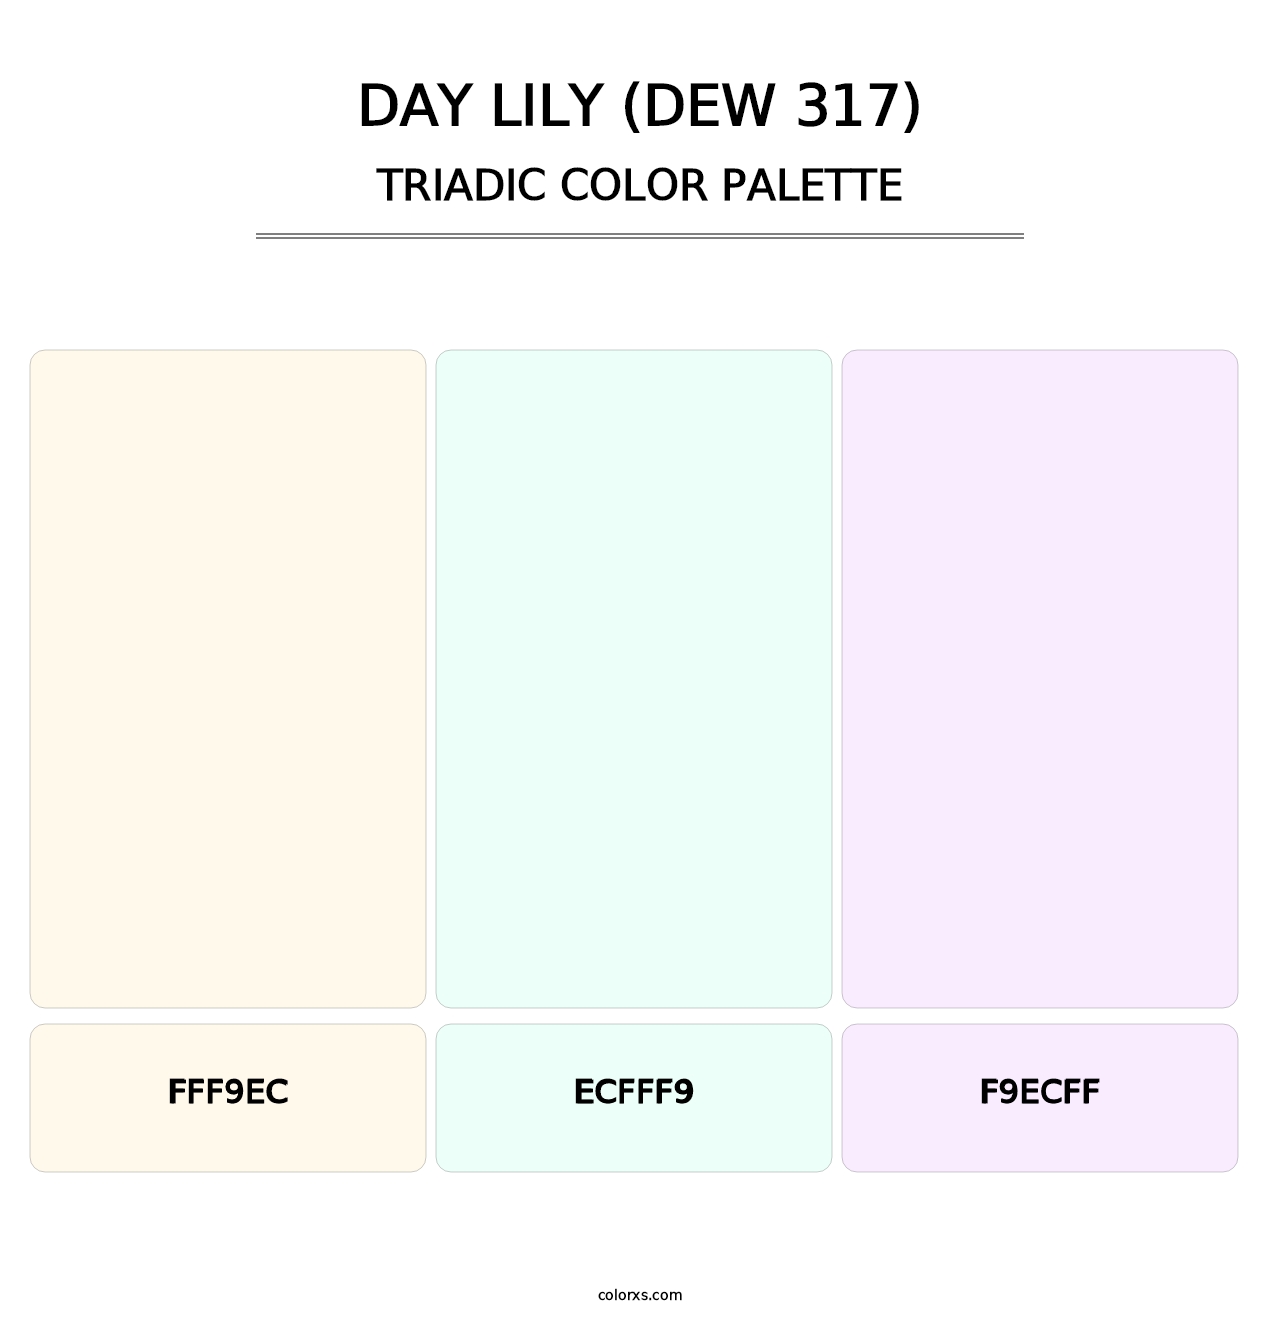 Day Lily (DEW 317) - Triadic Color Palette